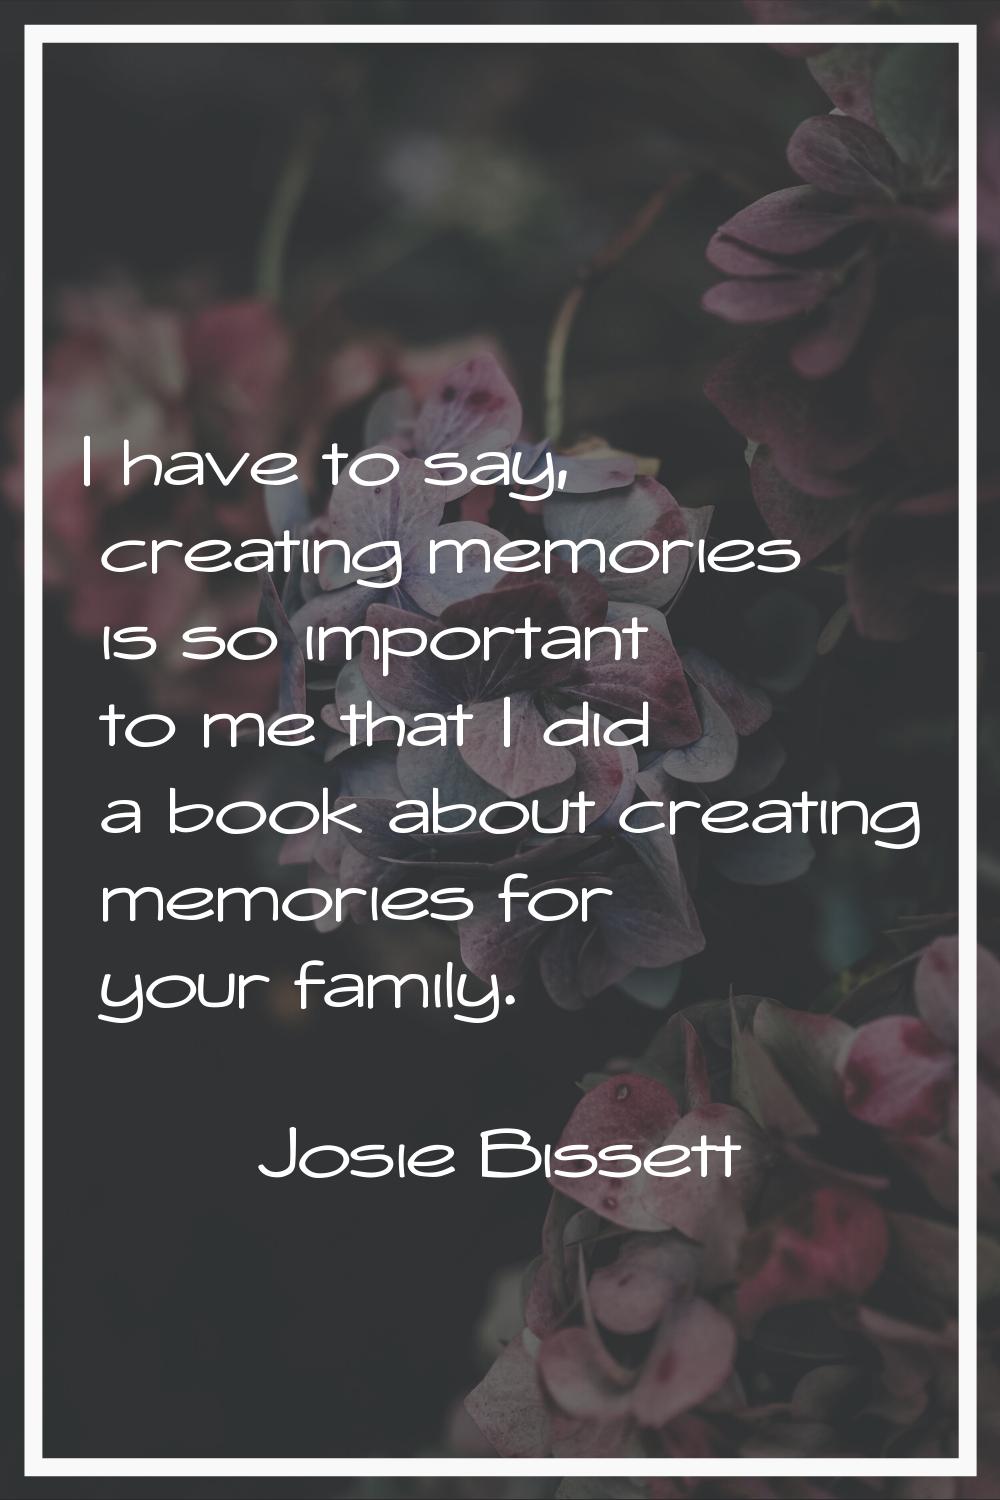 I have to say, creating memories is so important to me that I did a book about creating memories fo